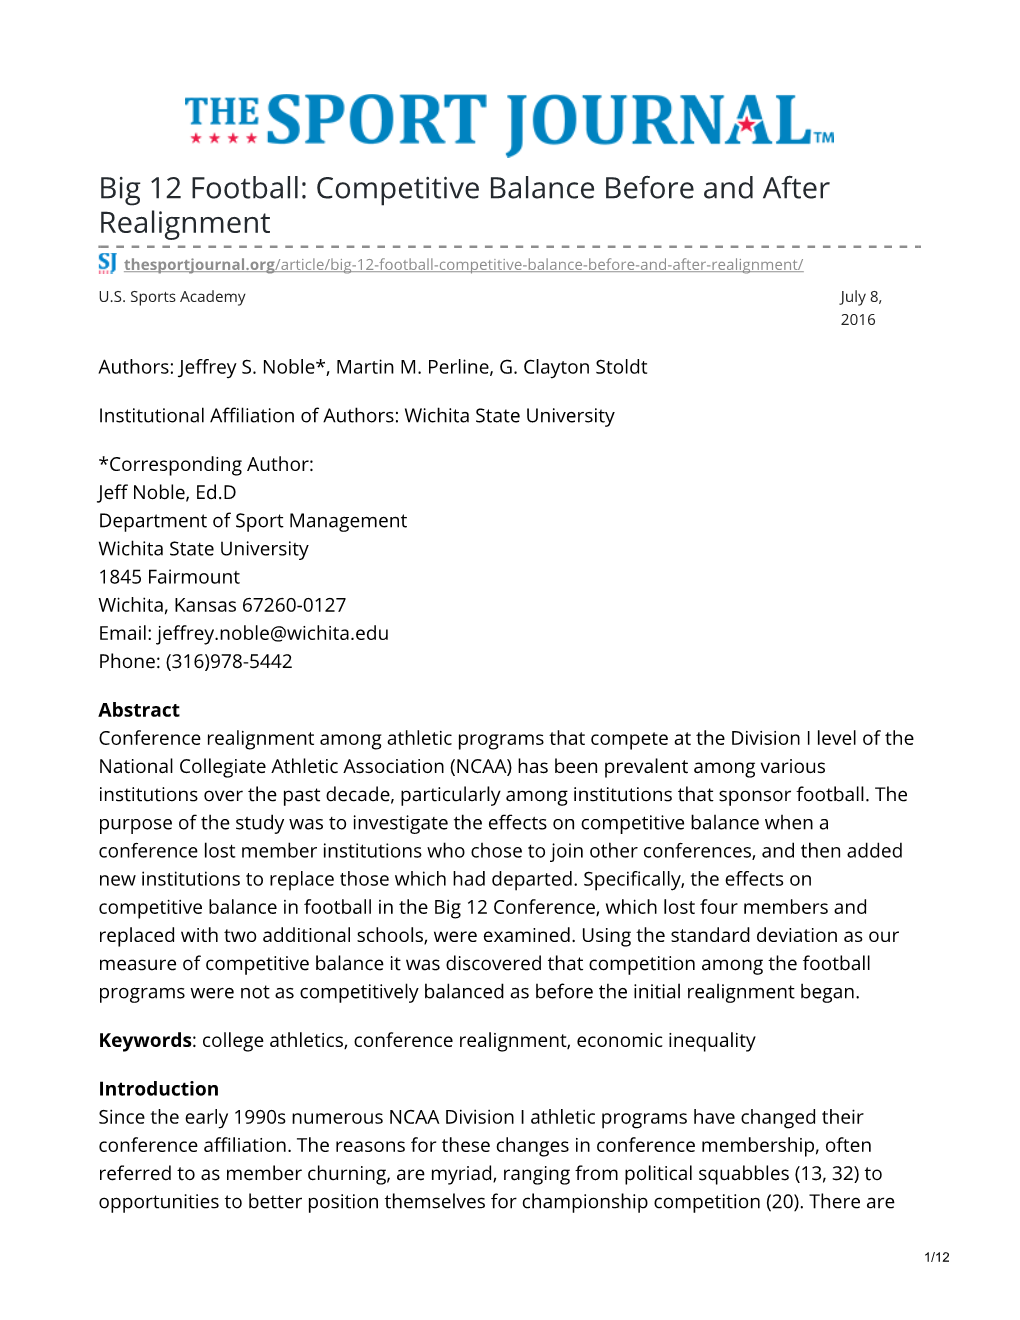 Big 12 Football: Competitive Balance Before and After Realignment